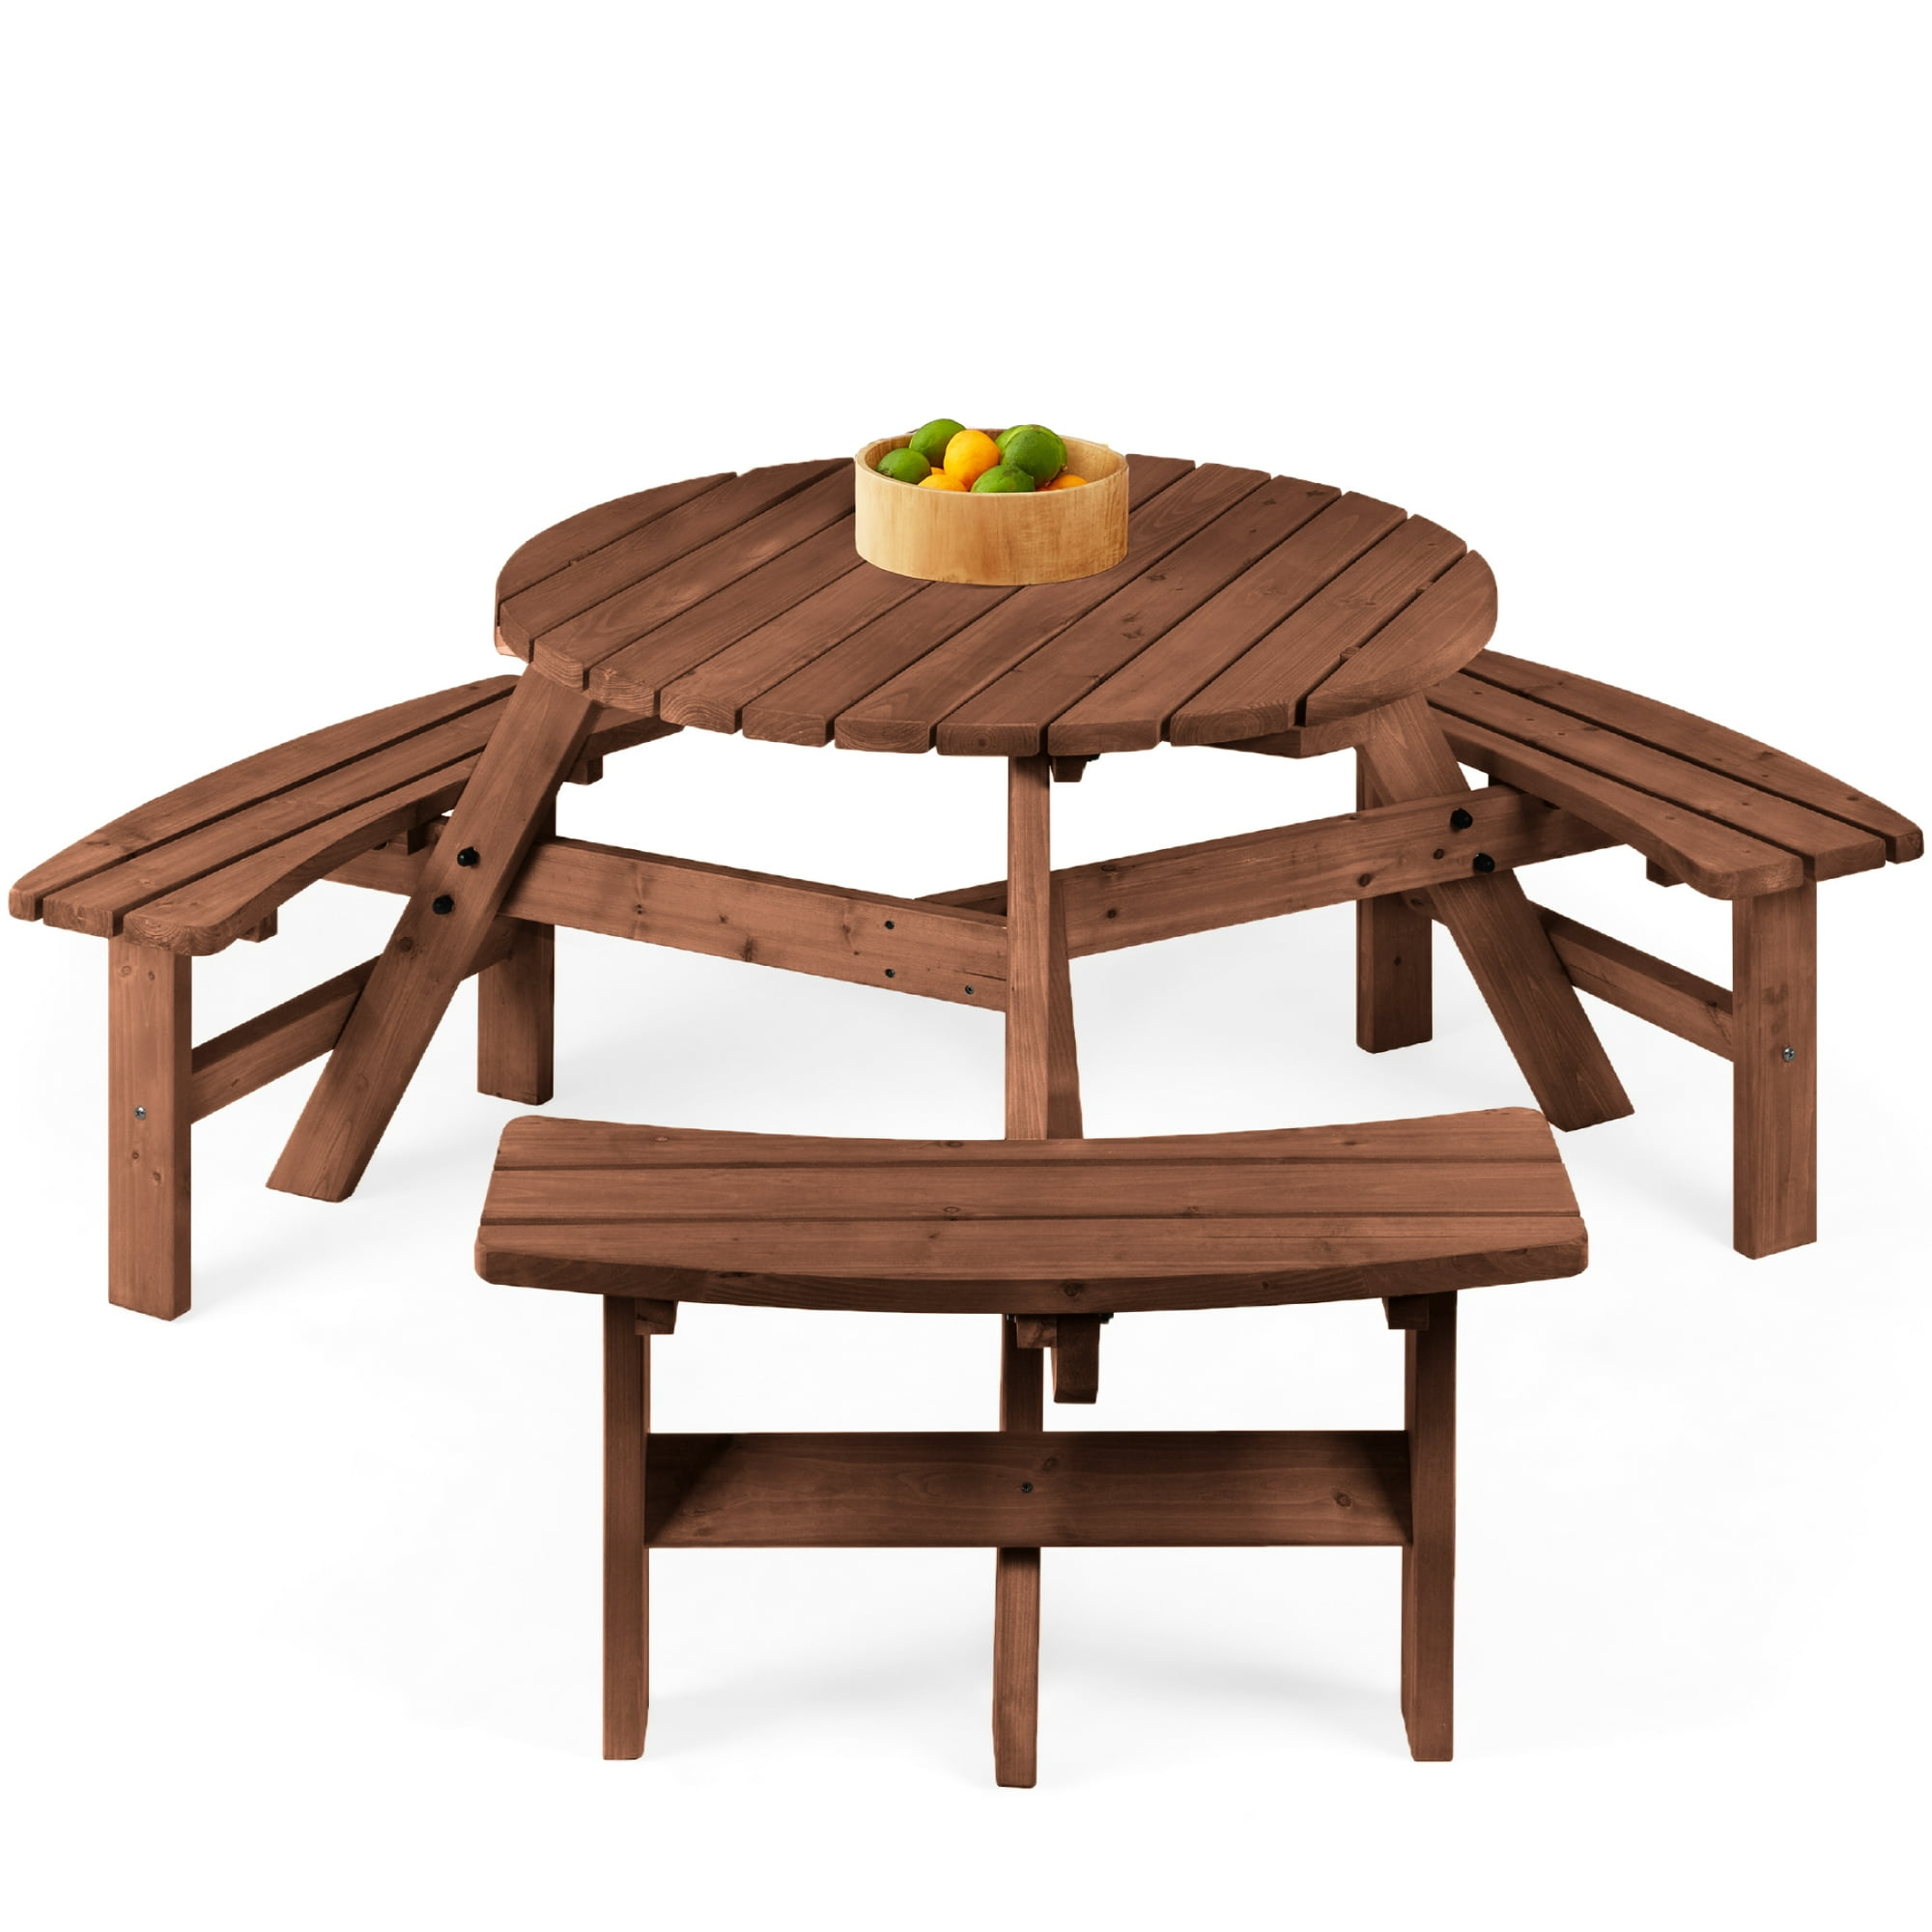 6-Person Best Choice Products Circular Outdoor Wooden Picnic Table w/ 3 Built-In Benches (Walnut Brown, Brown) $160 + Free Shipping